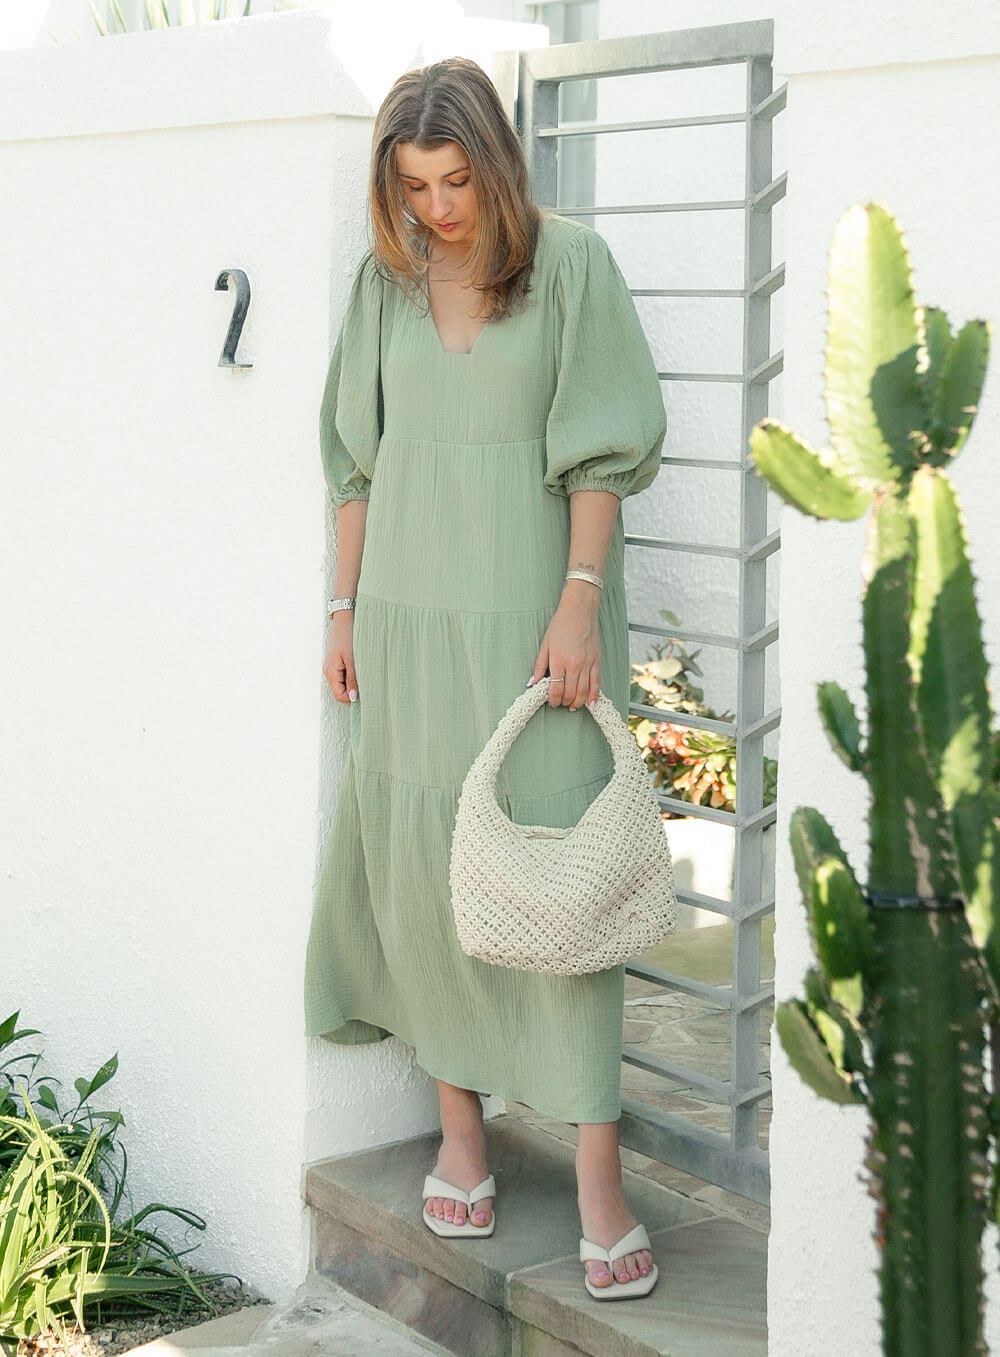 The Olive Dress in Sage is mid length, lined, features elasticated sleeve, tiered style front bodice detailing.